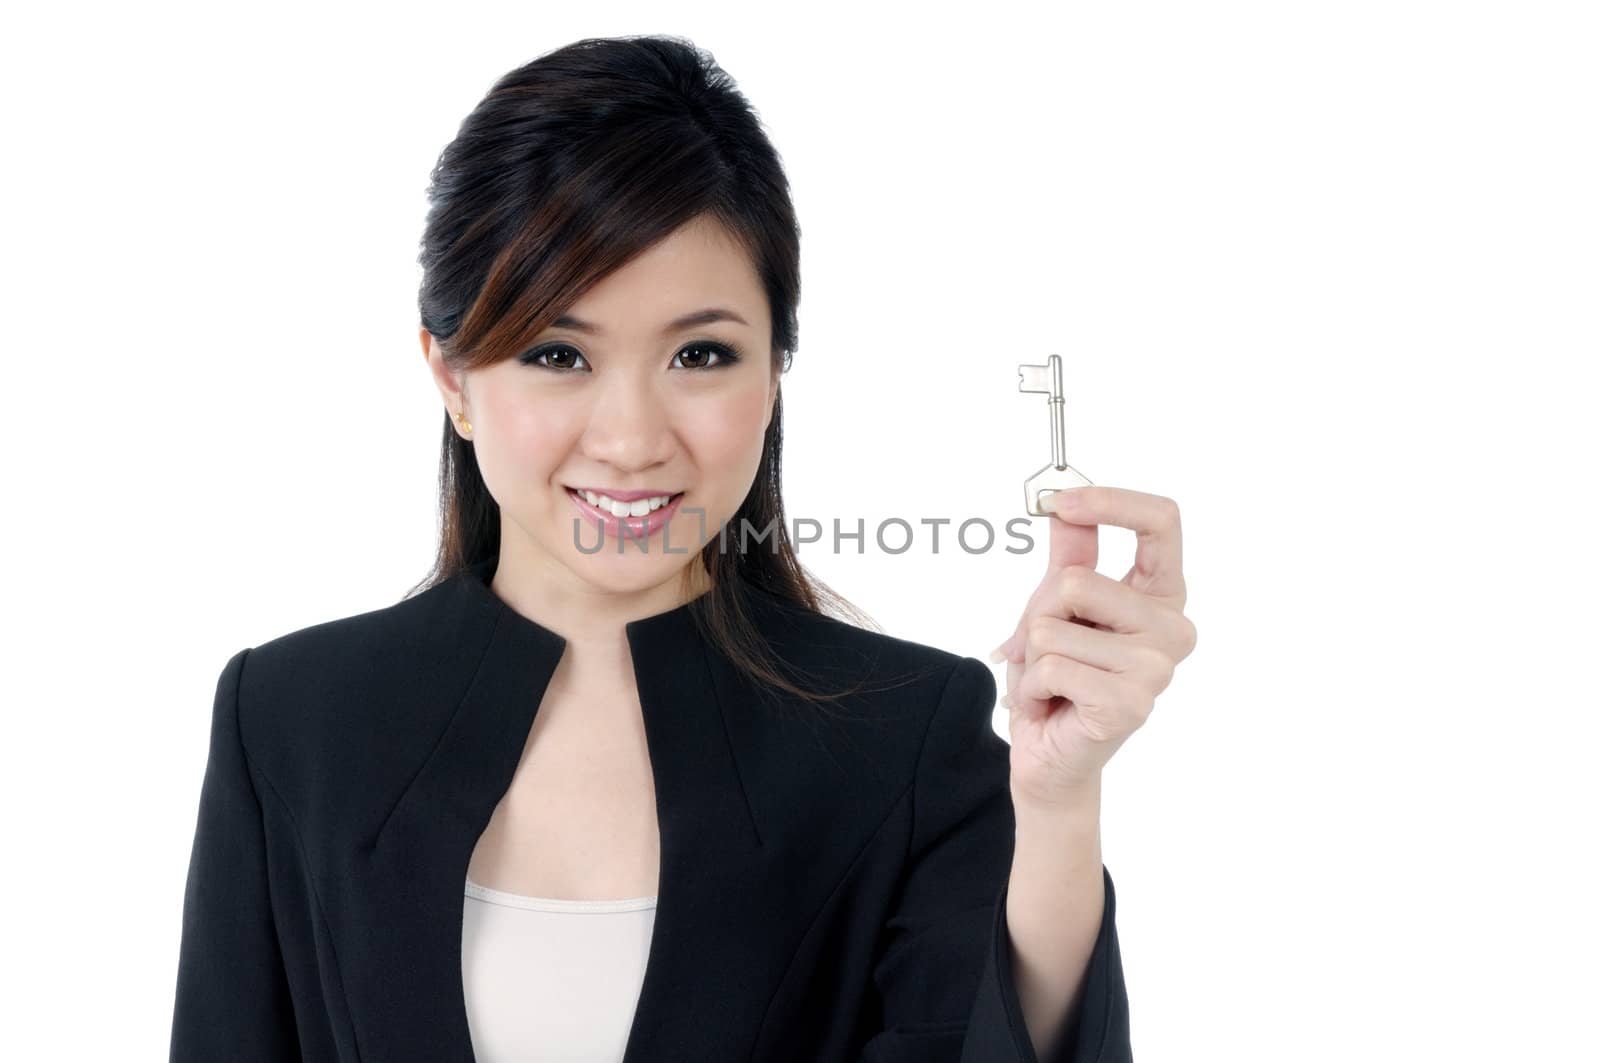 Portrait of an attractive young businesswoman holding a key over white background.